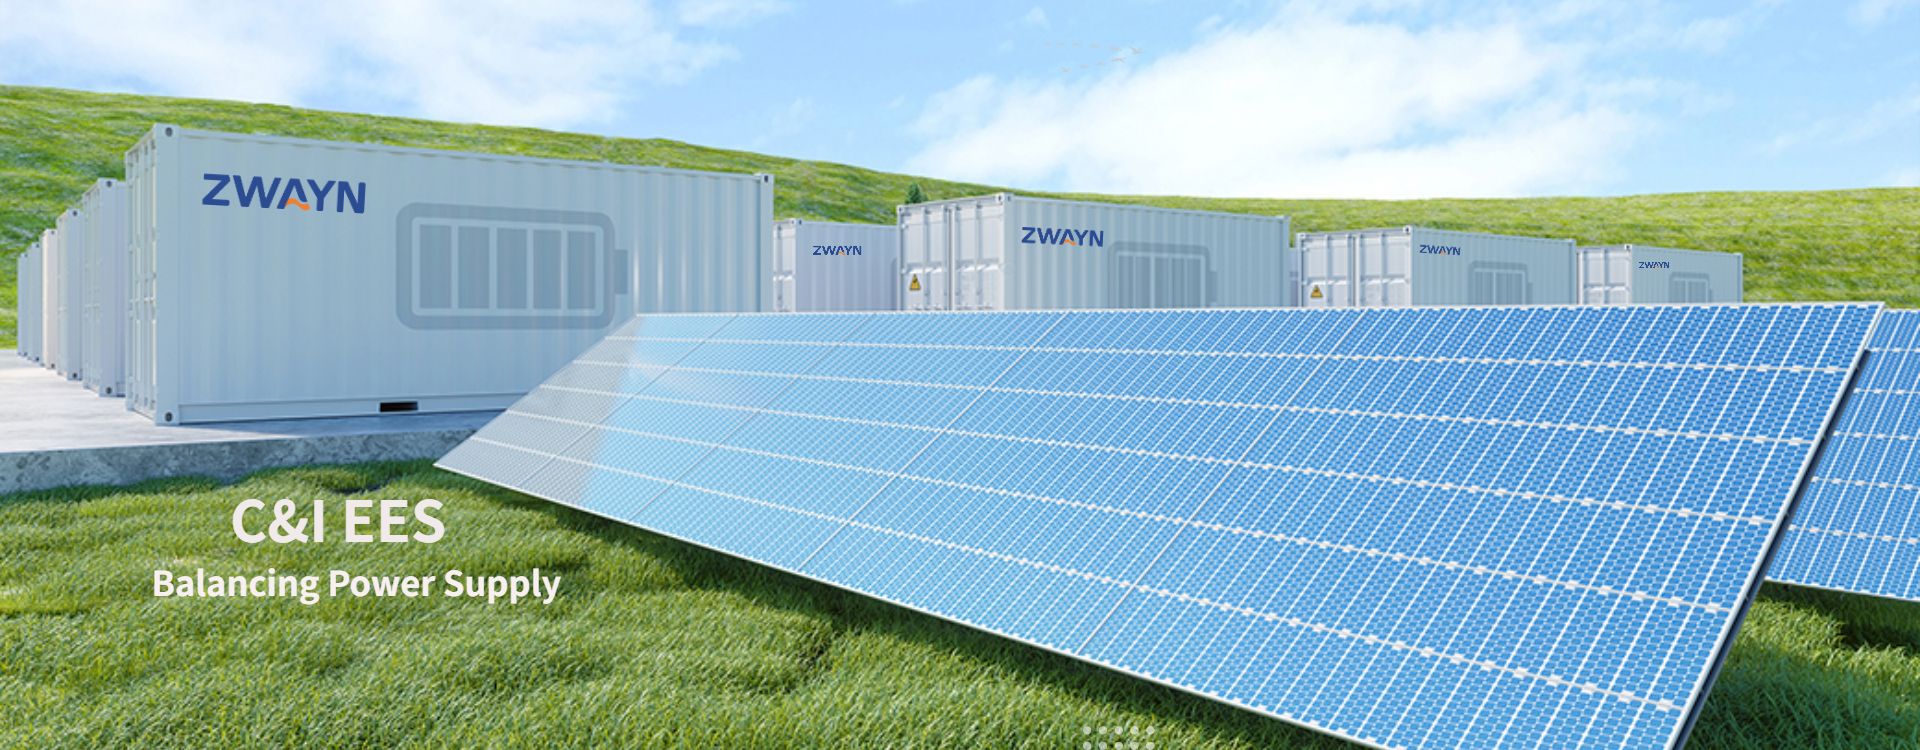 Zwayn Industrial and Commercial Energy Storage Systems